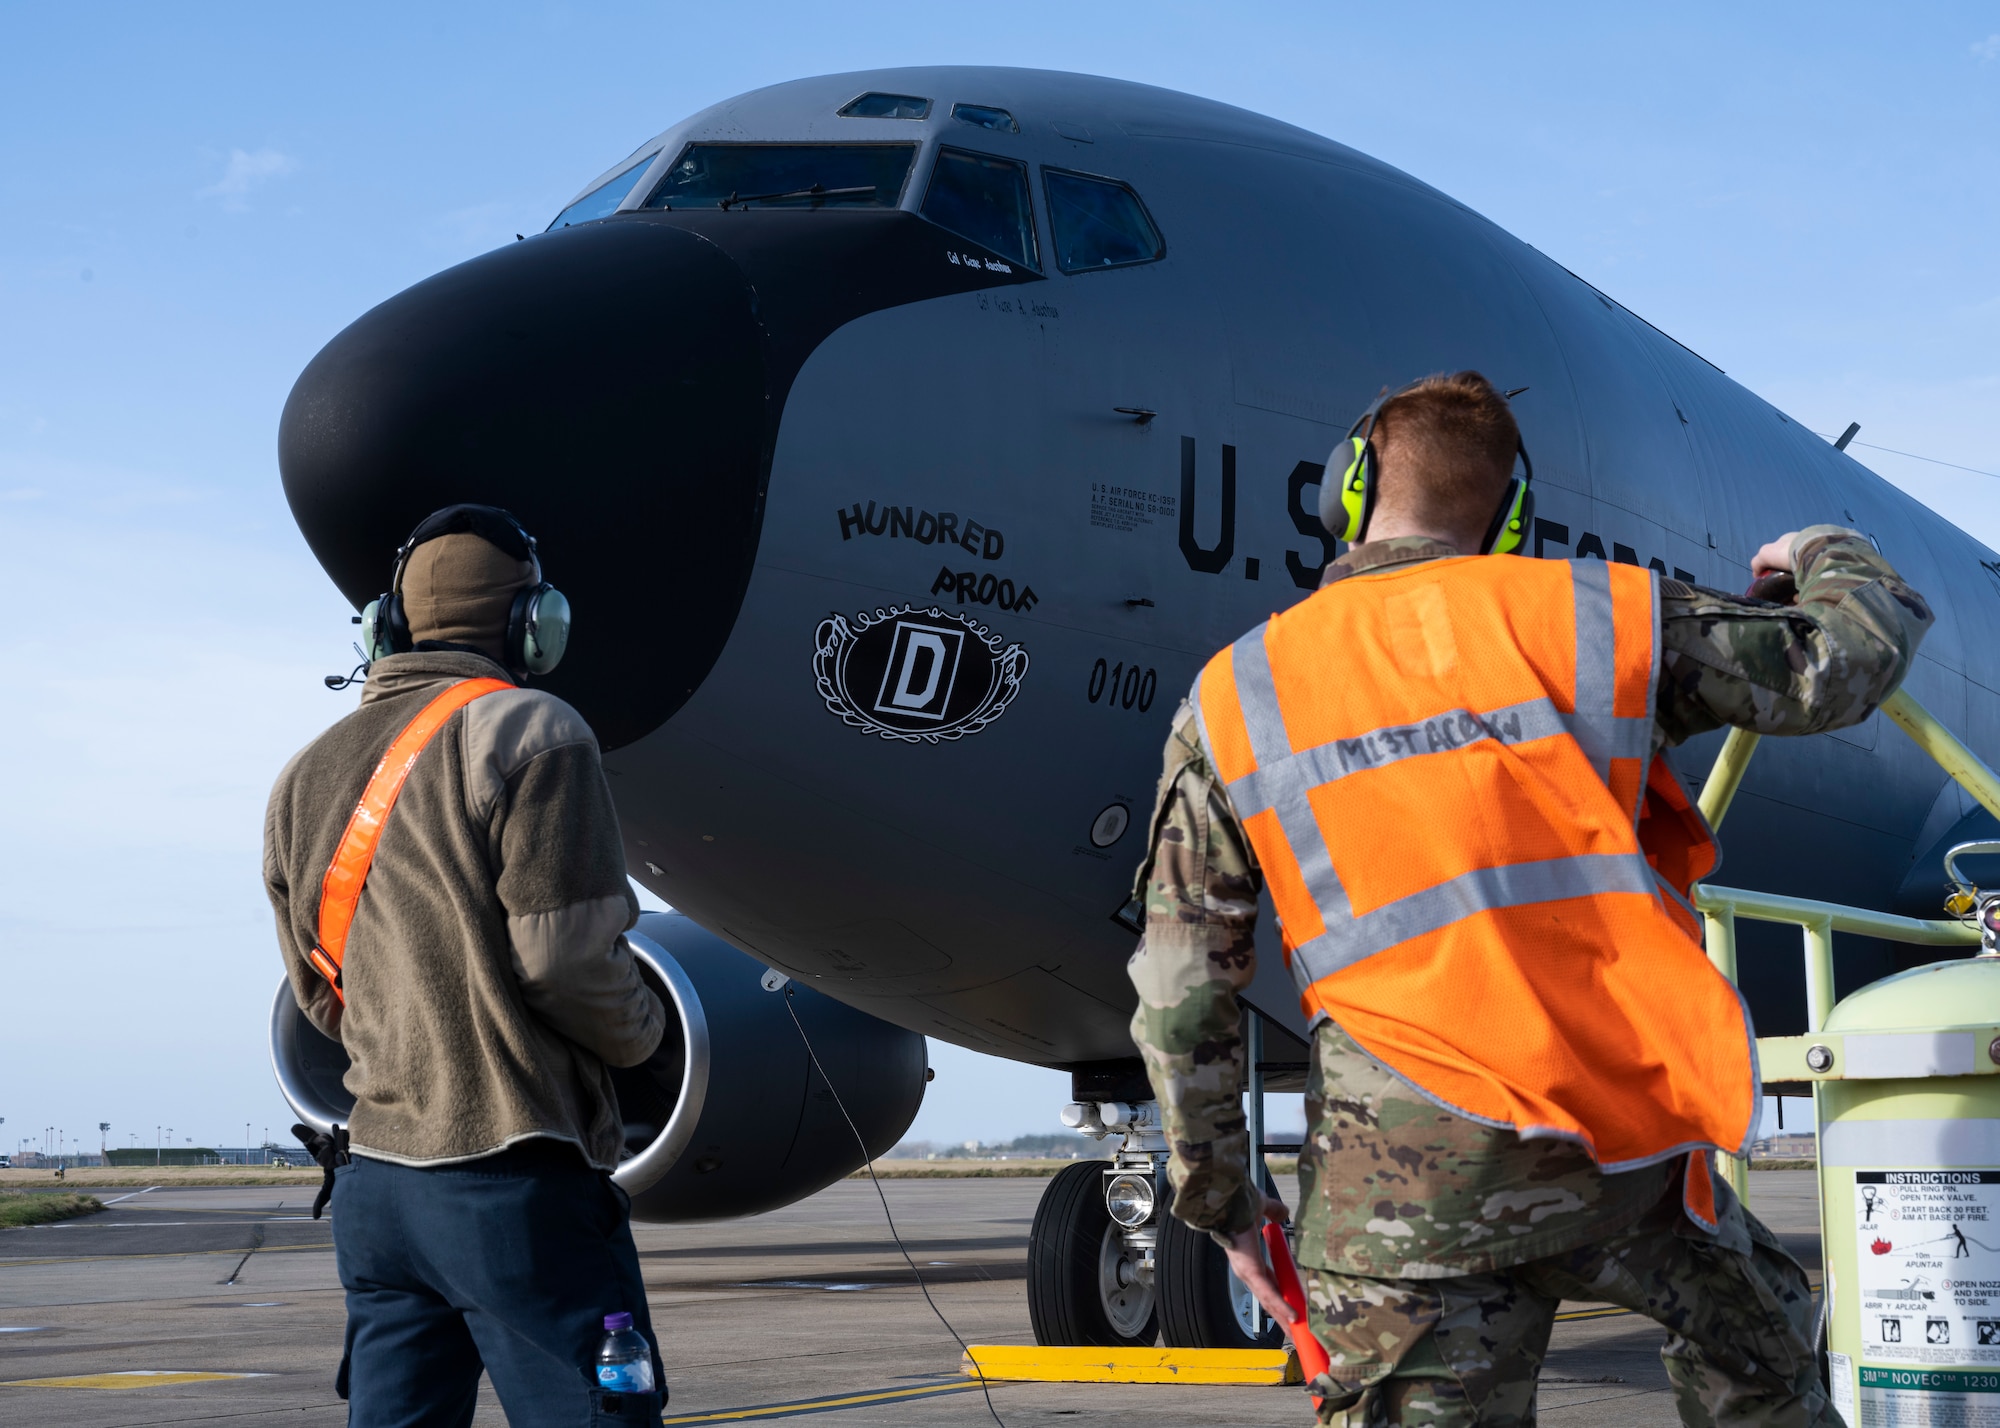 A U.S. Air Force Airmen assigned to the 100th Maintenance Squadron perform pre-flight checks on a KC-135 Stratotanker aircraft at Royal Air Force Mildenhall, England, Feb. 16, 2022. The 100th ARW is the only permanent U.S. air refueling wing in the European theater providing the critical air refueling "bridge" that enables the Expeditionary Air Force to deploy around the globe on a moment's notice.